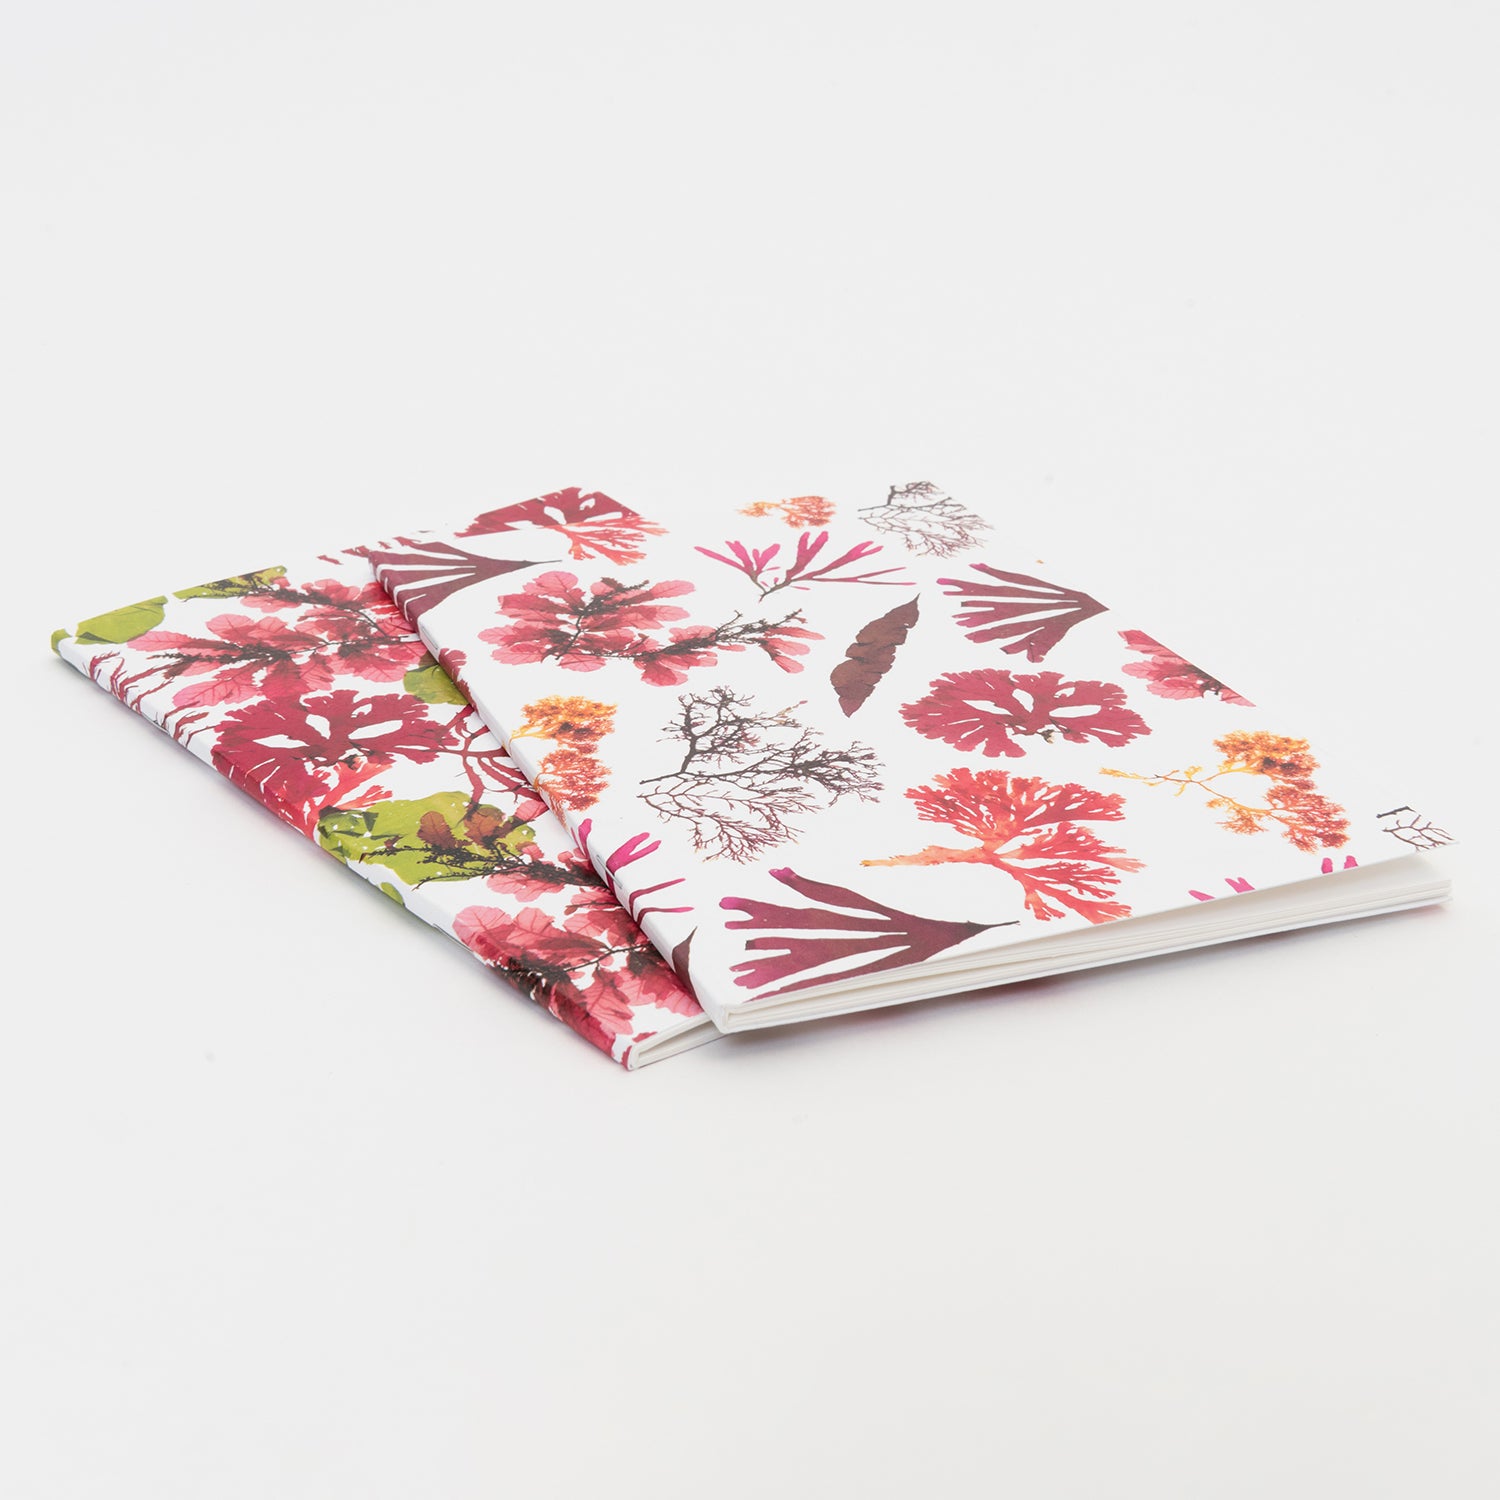 3/4 shot of the pack of notebooks featuring the pressed seaweed designs